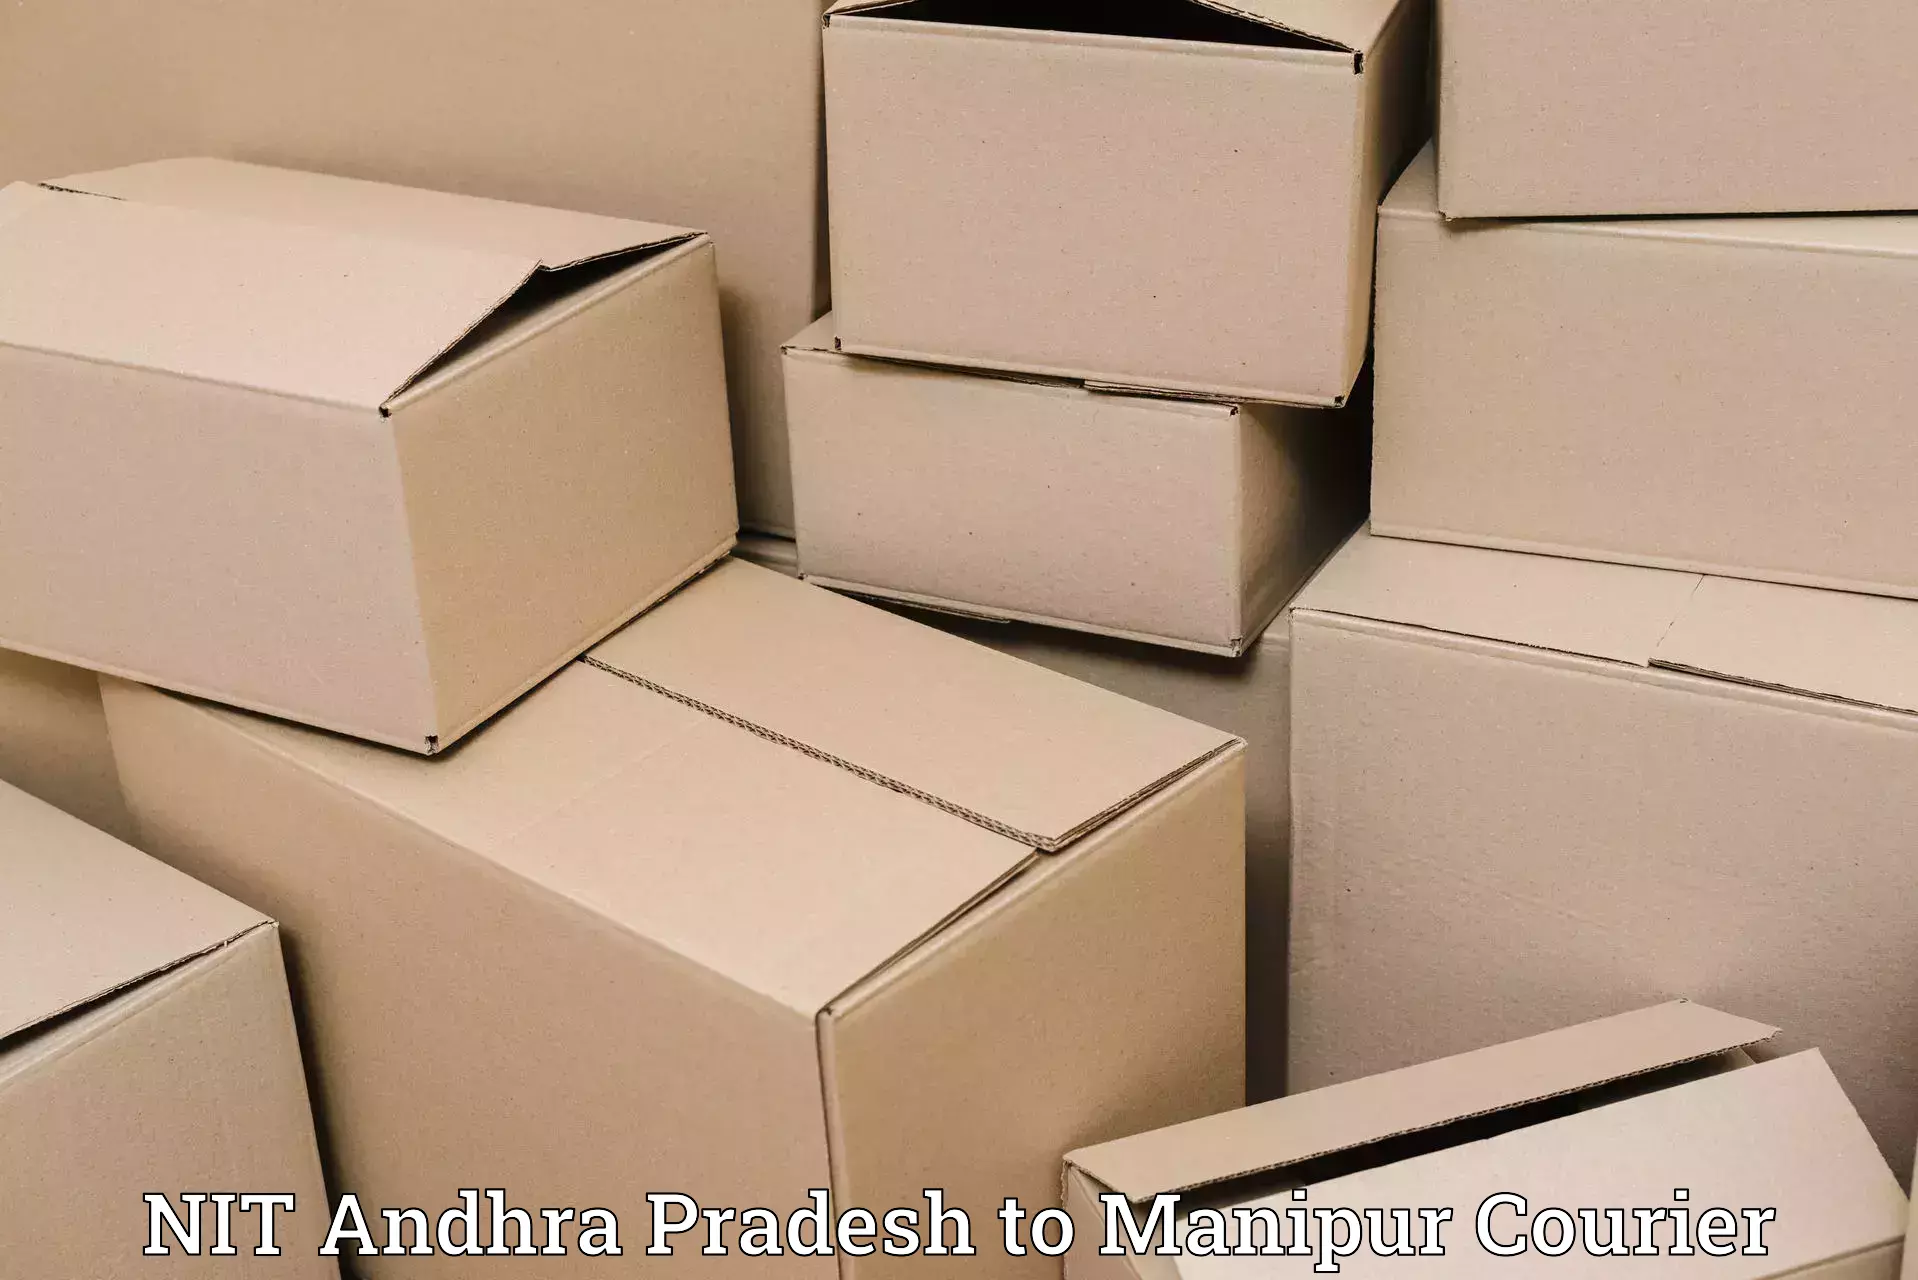 Courier service comparison NIT Andhra Pradesh to Kakching